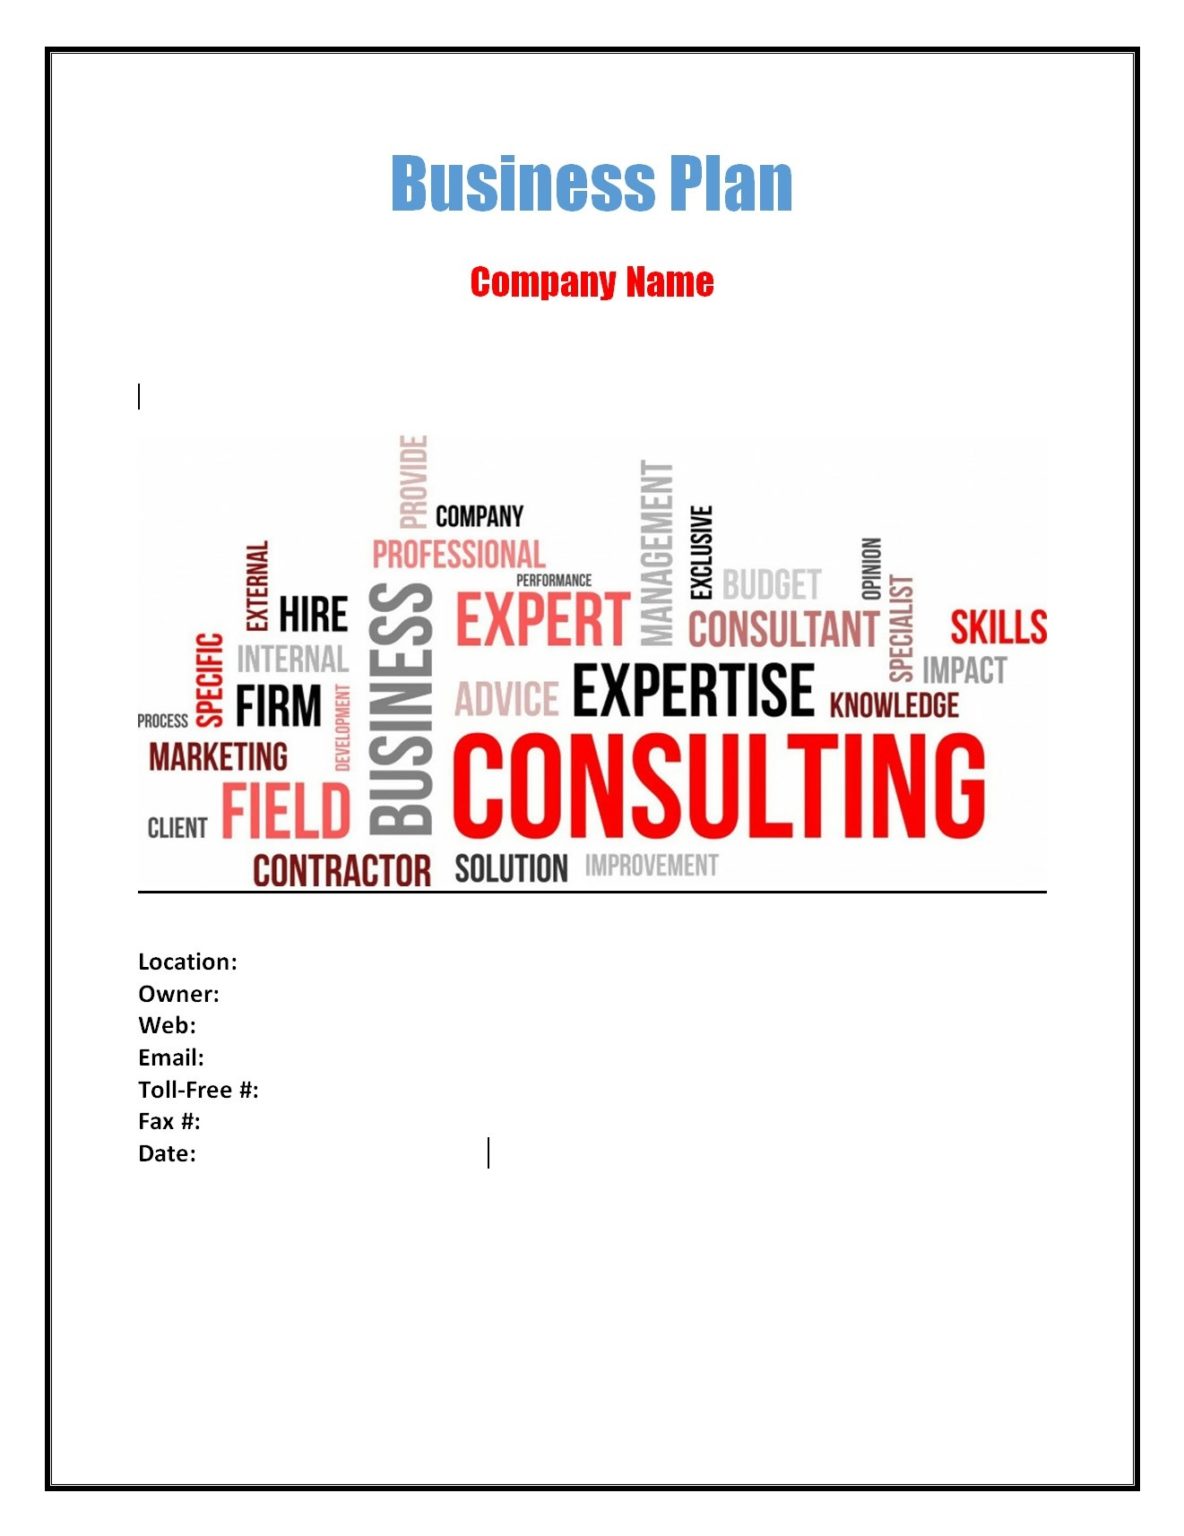 image consulting business plan